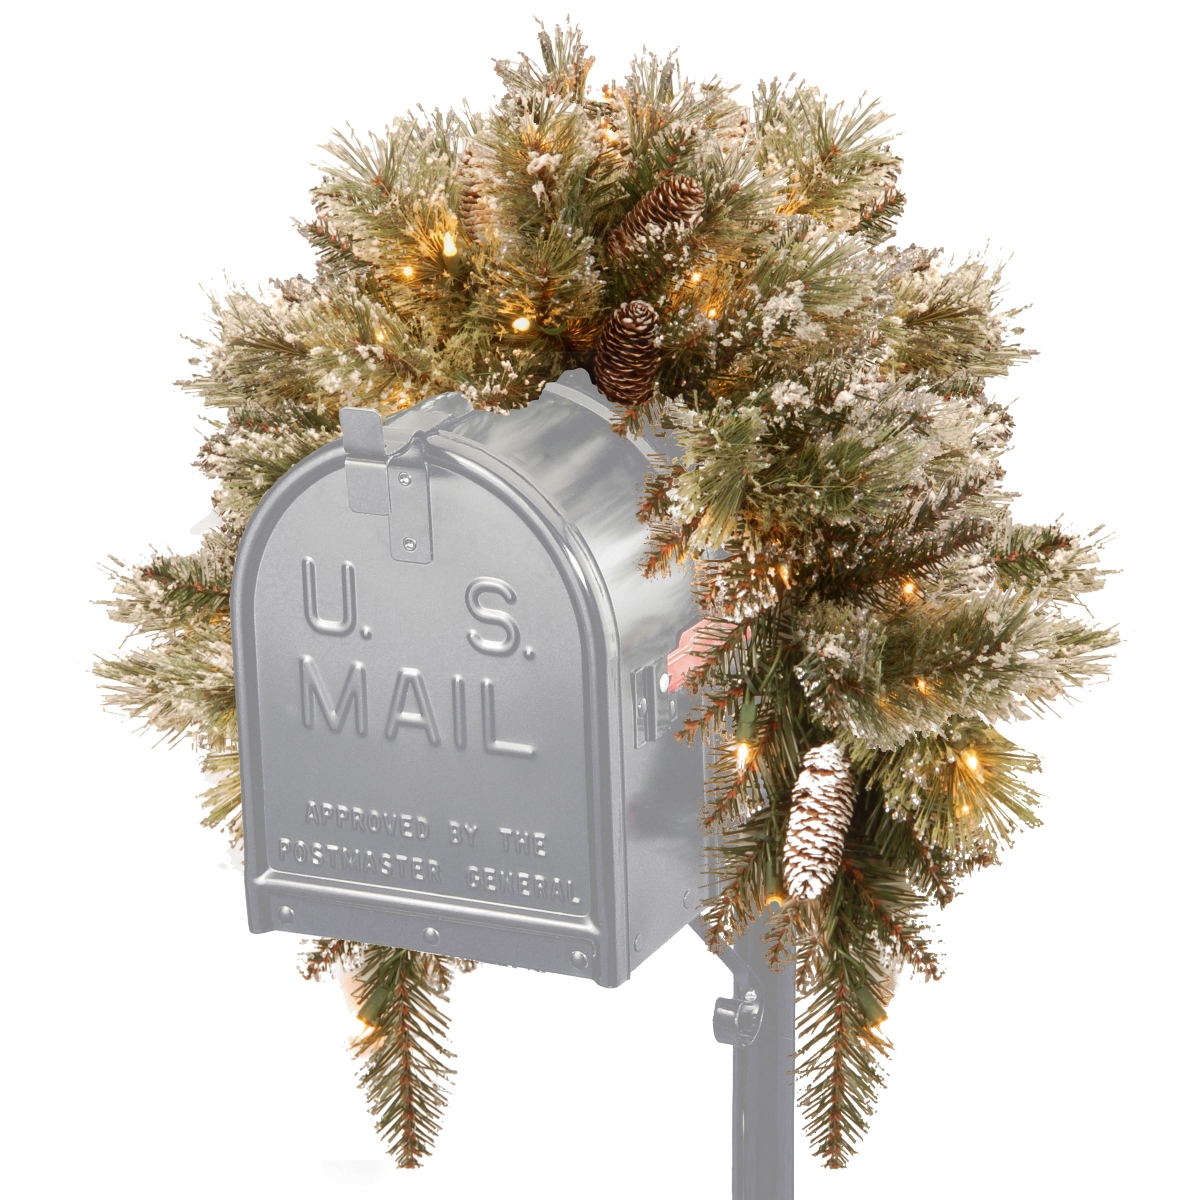 3 Ft. Glittery Bristle Pine Mailbox Swag With 9 White Tipped Cones & 35 Warm White Battery Operated Operated Led Lights With Timer